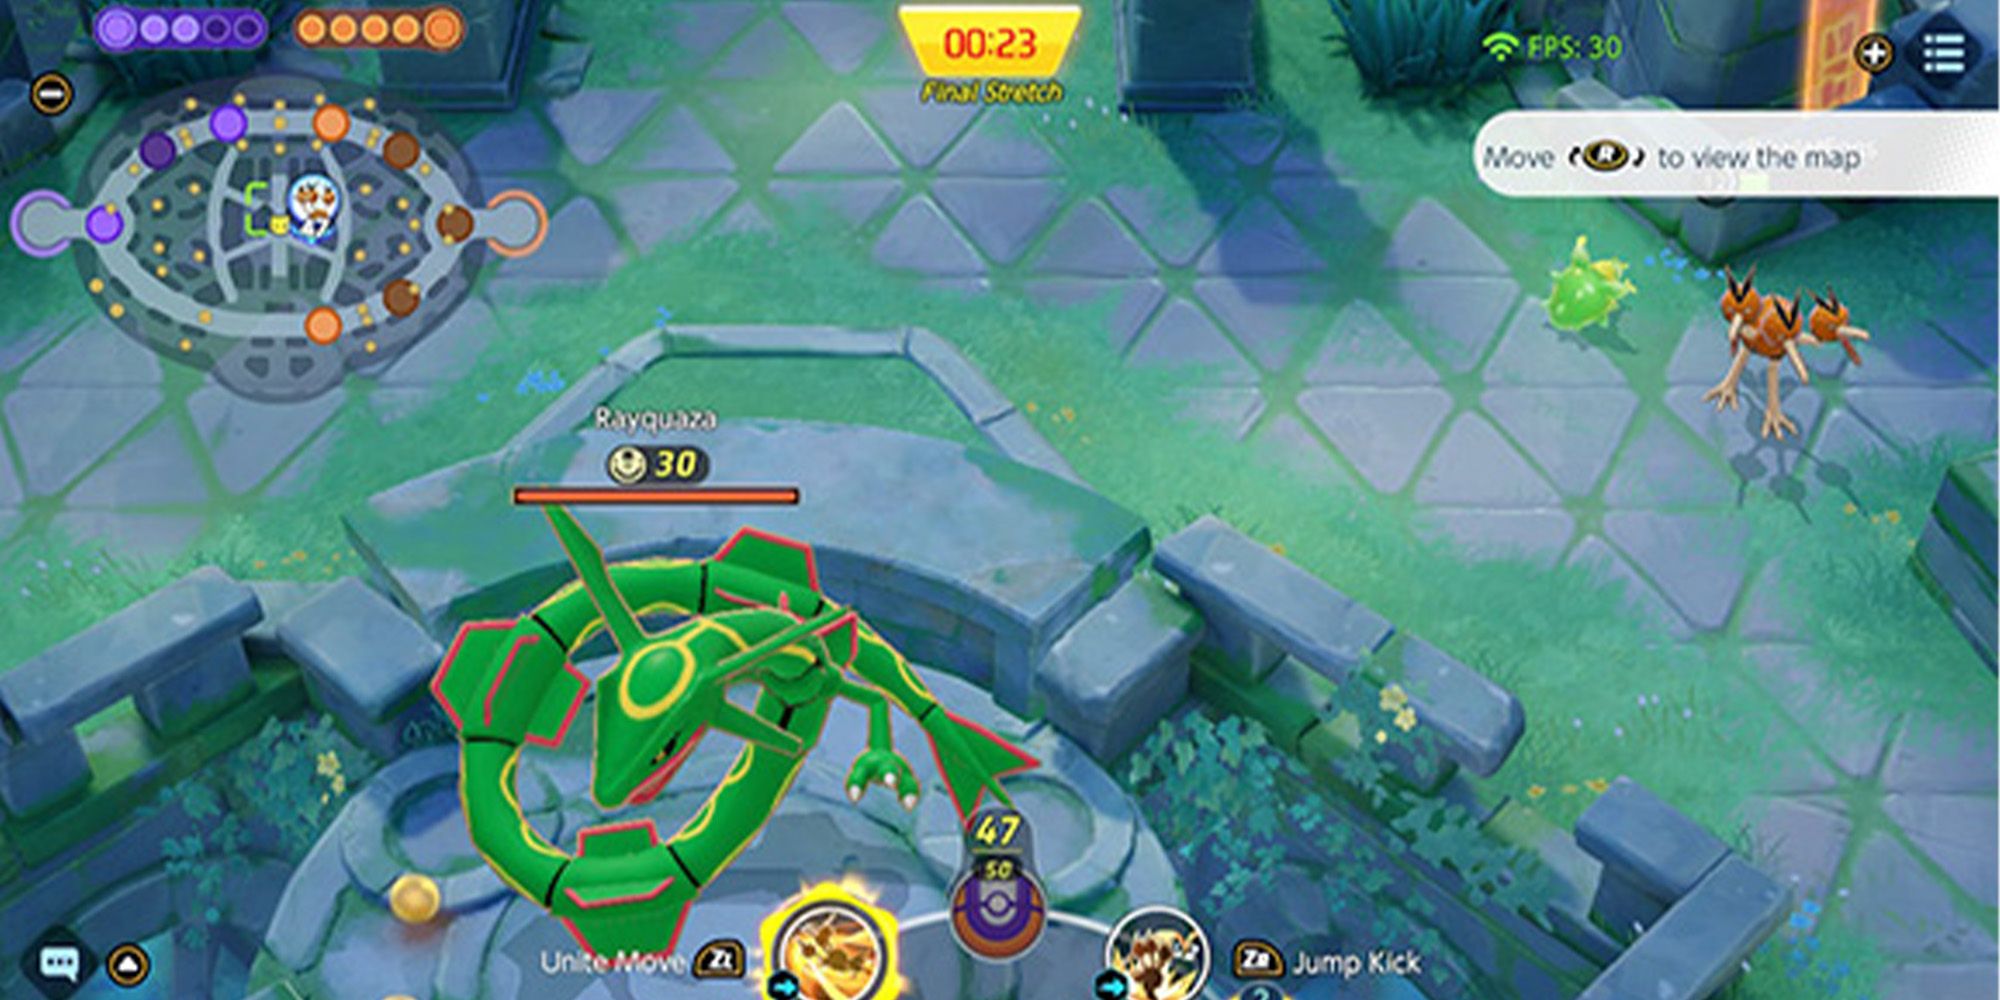 with 23 seconds left on the lock dotrio stares down rayquaza alone